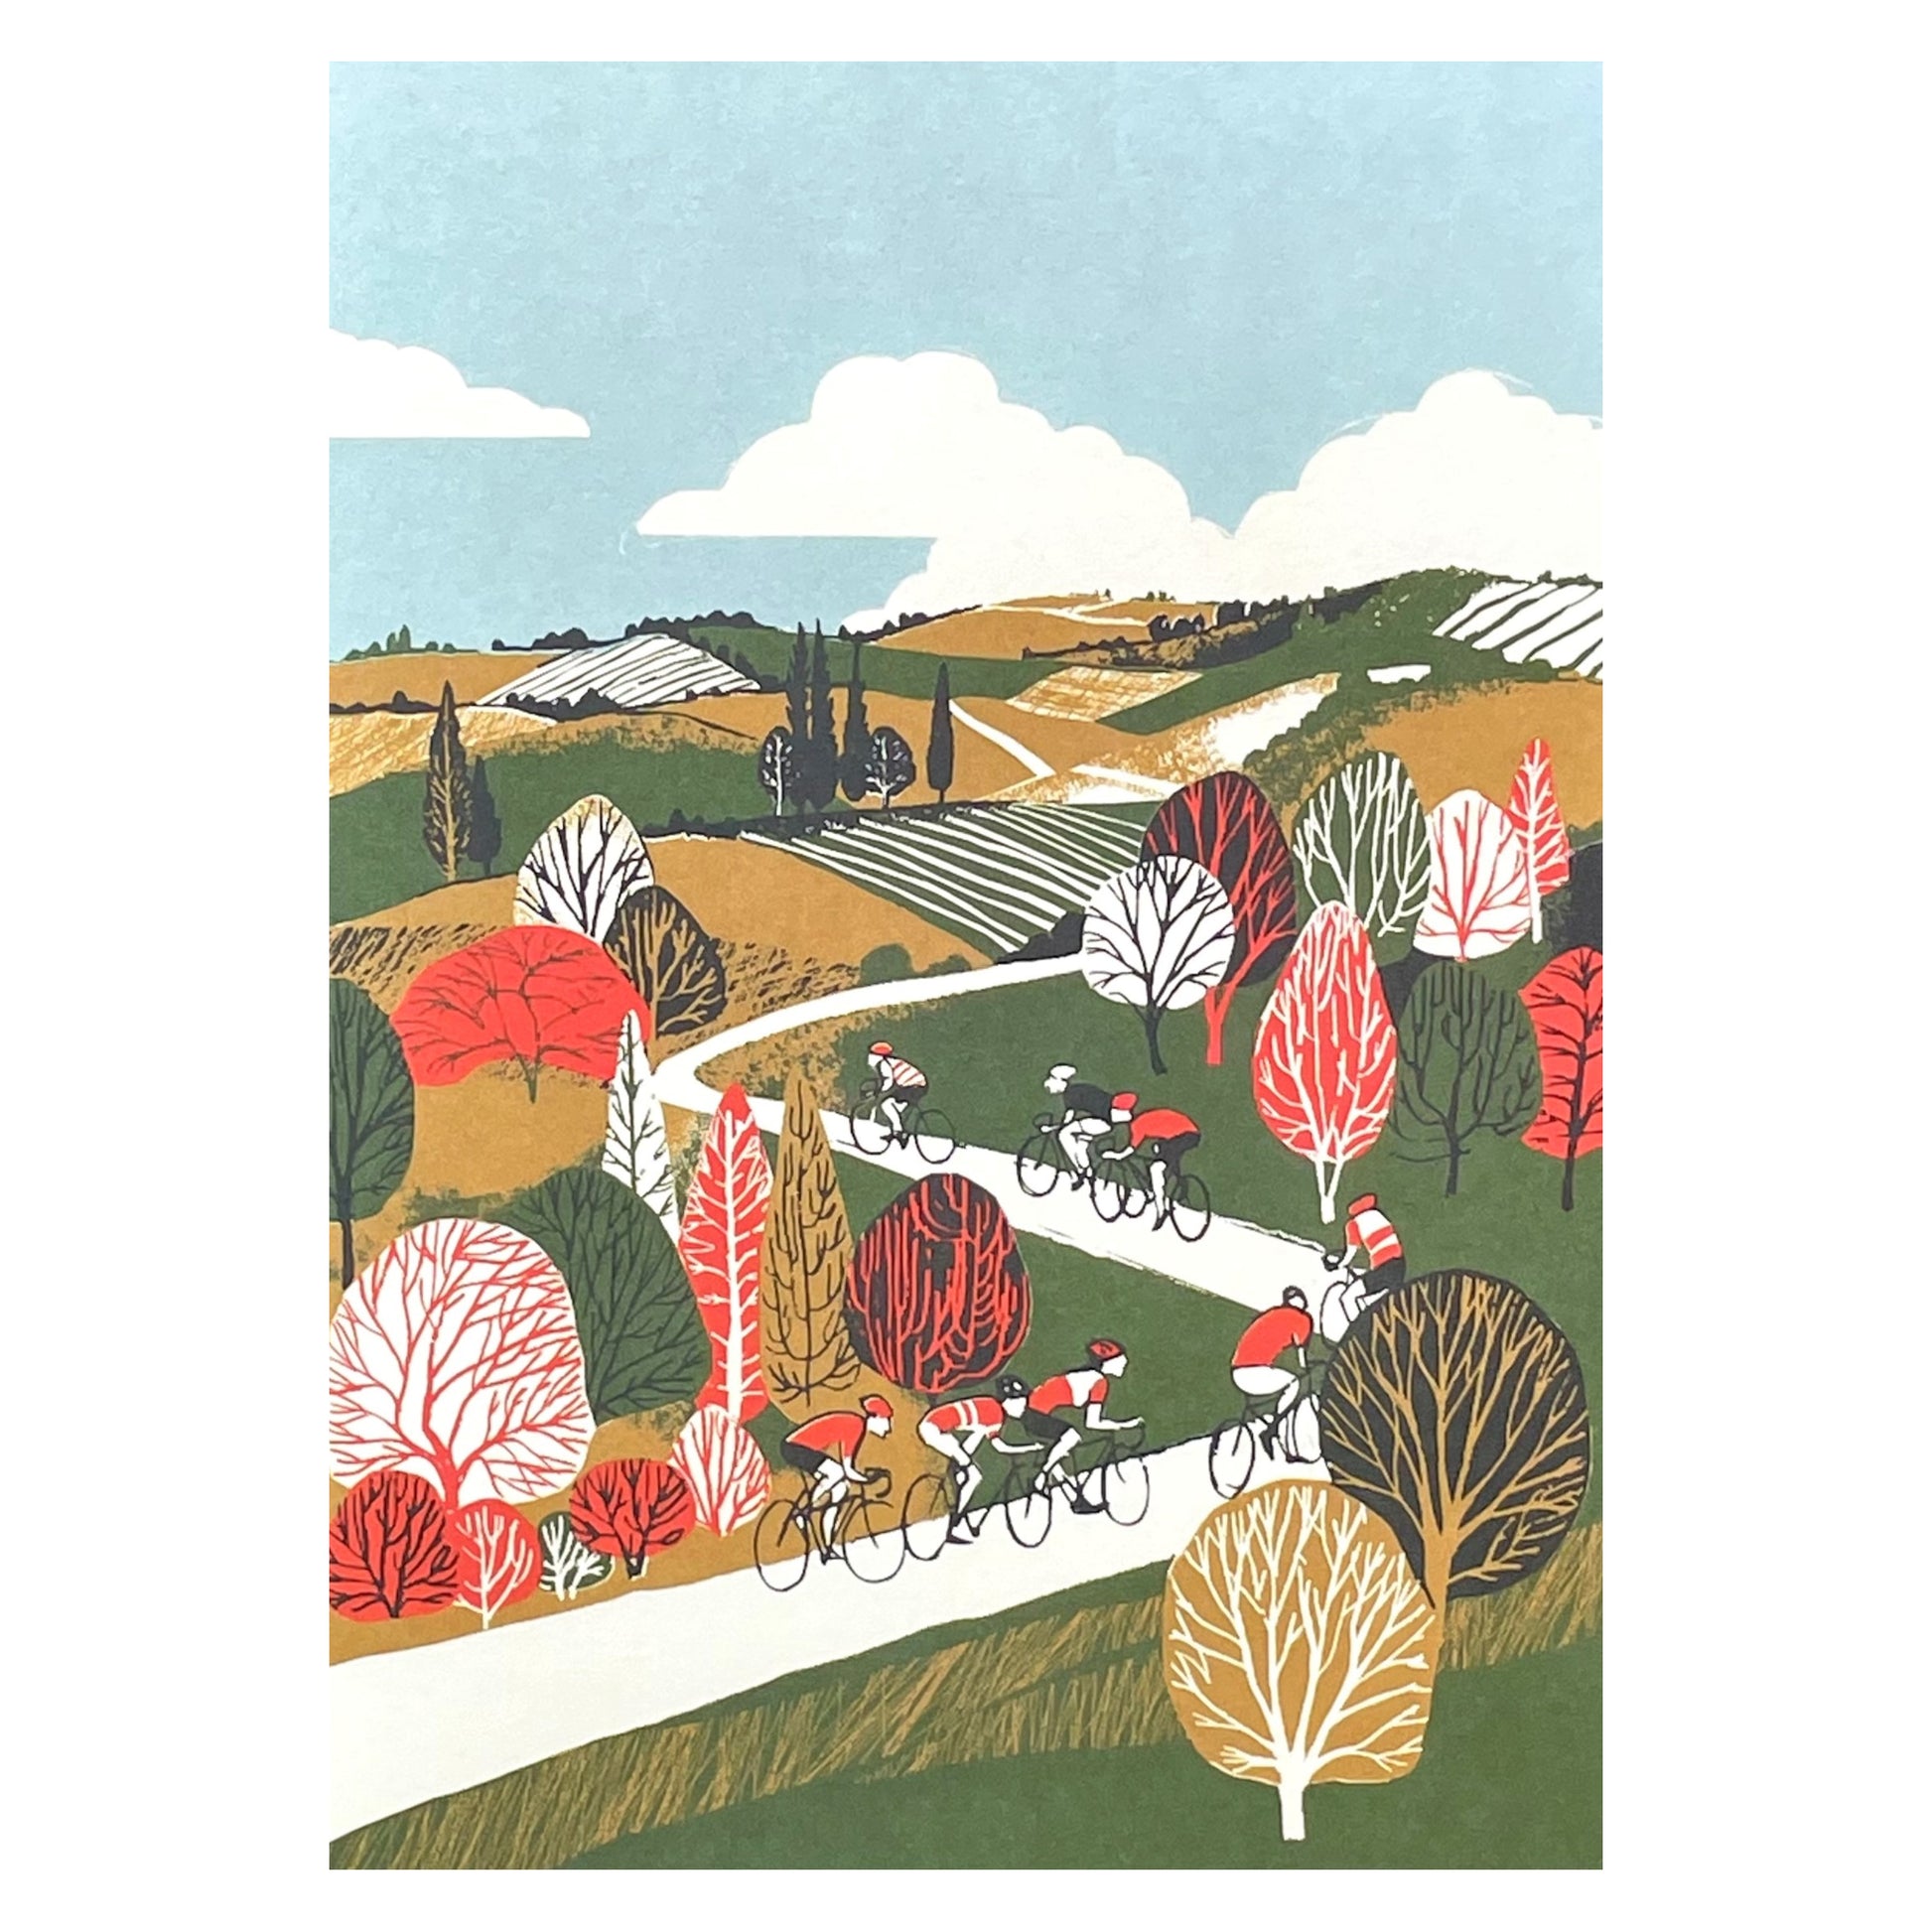 greetings card showing cyclists on a winding hilly road by Canns Down Press